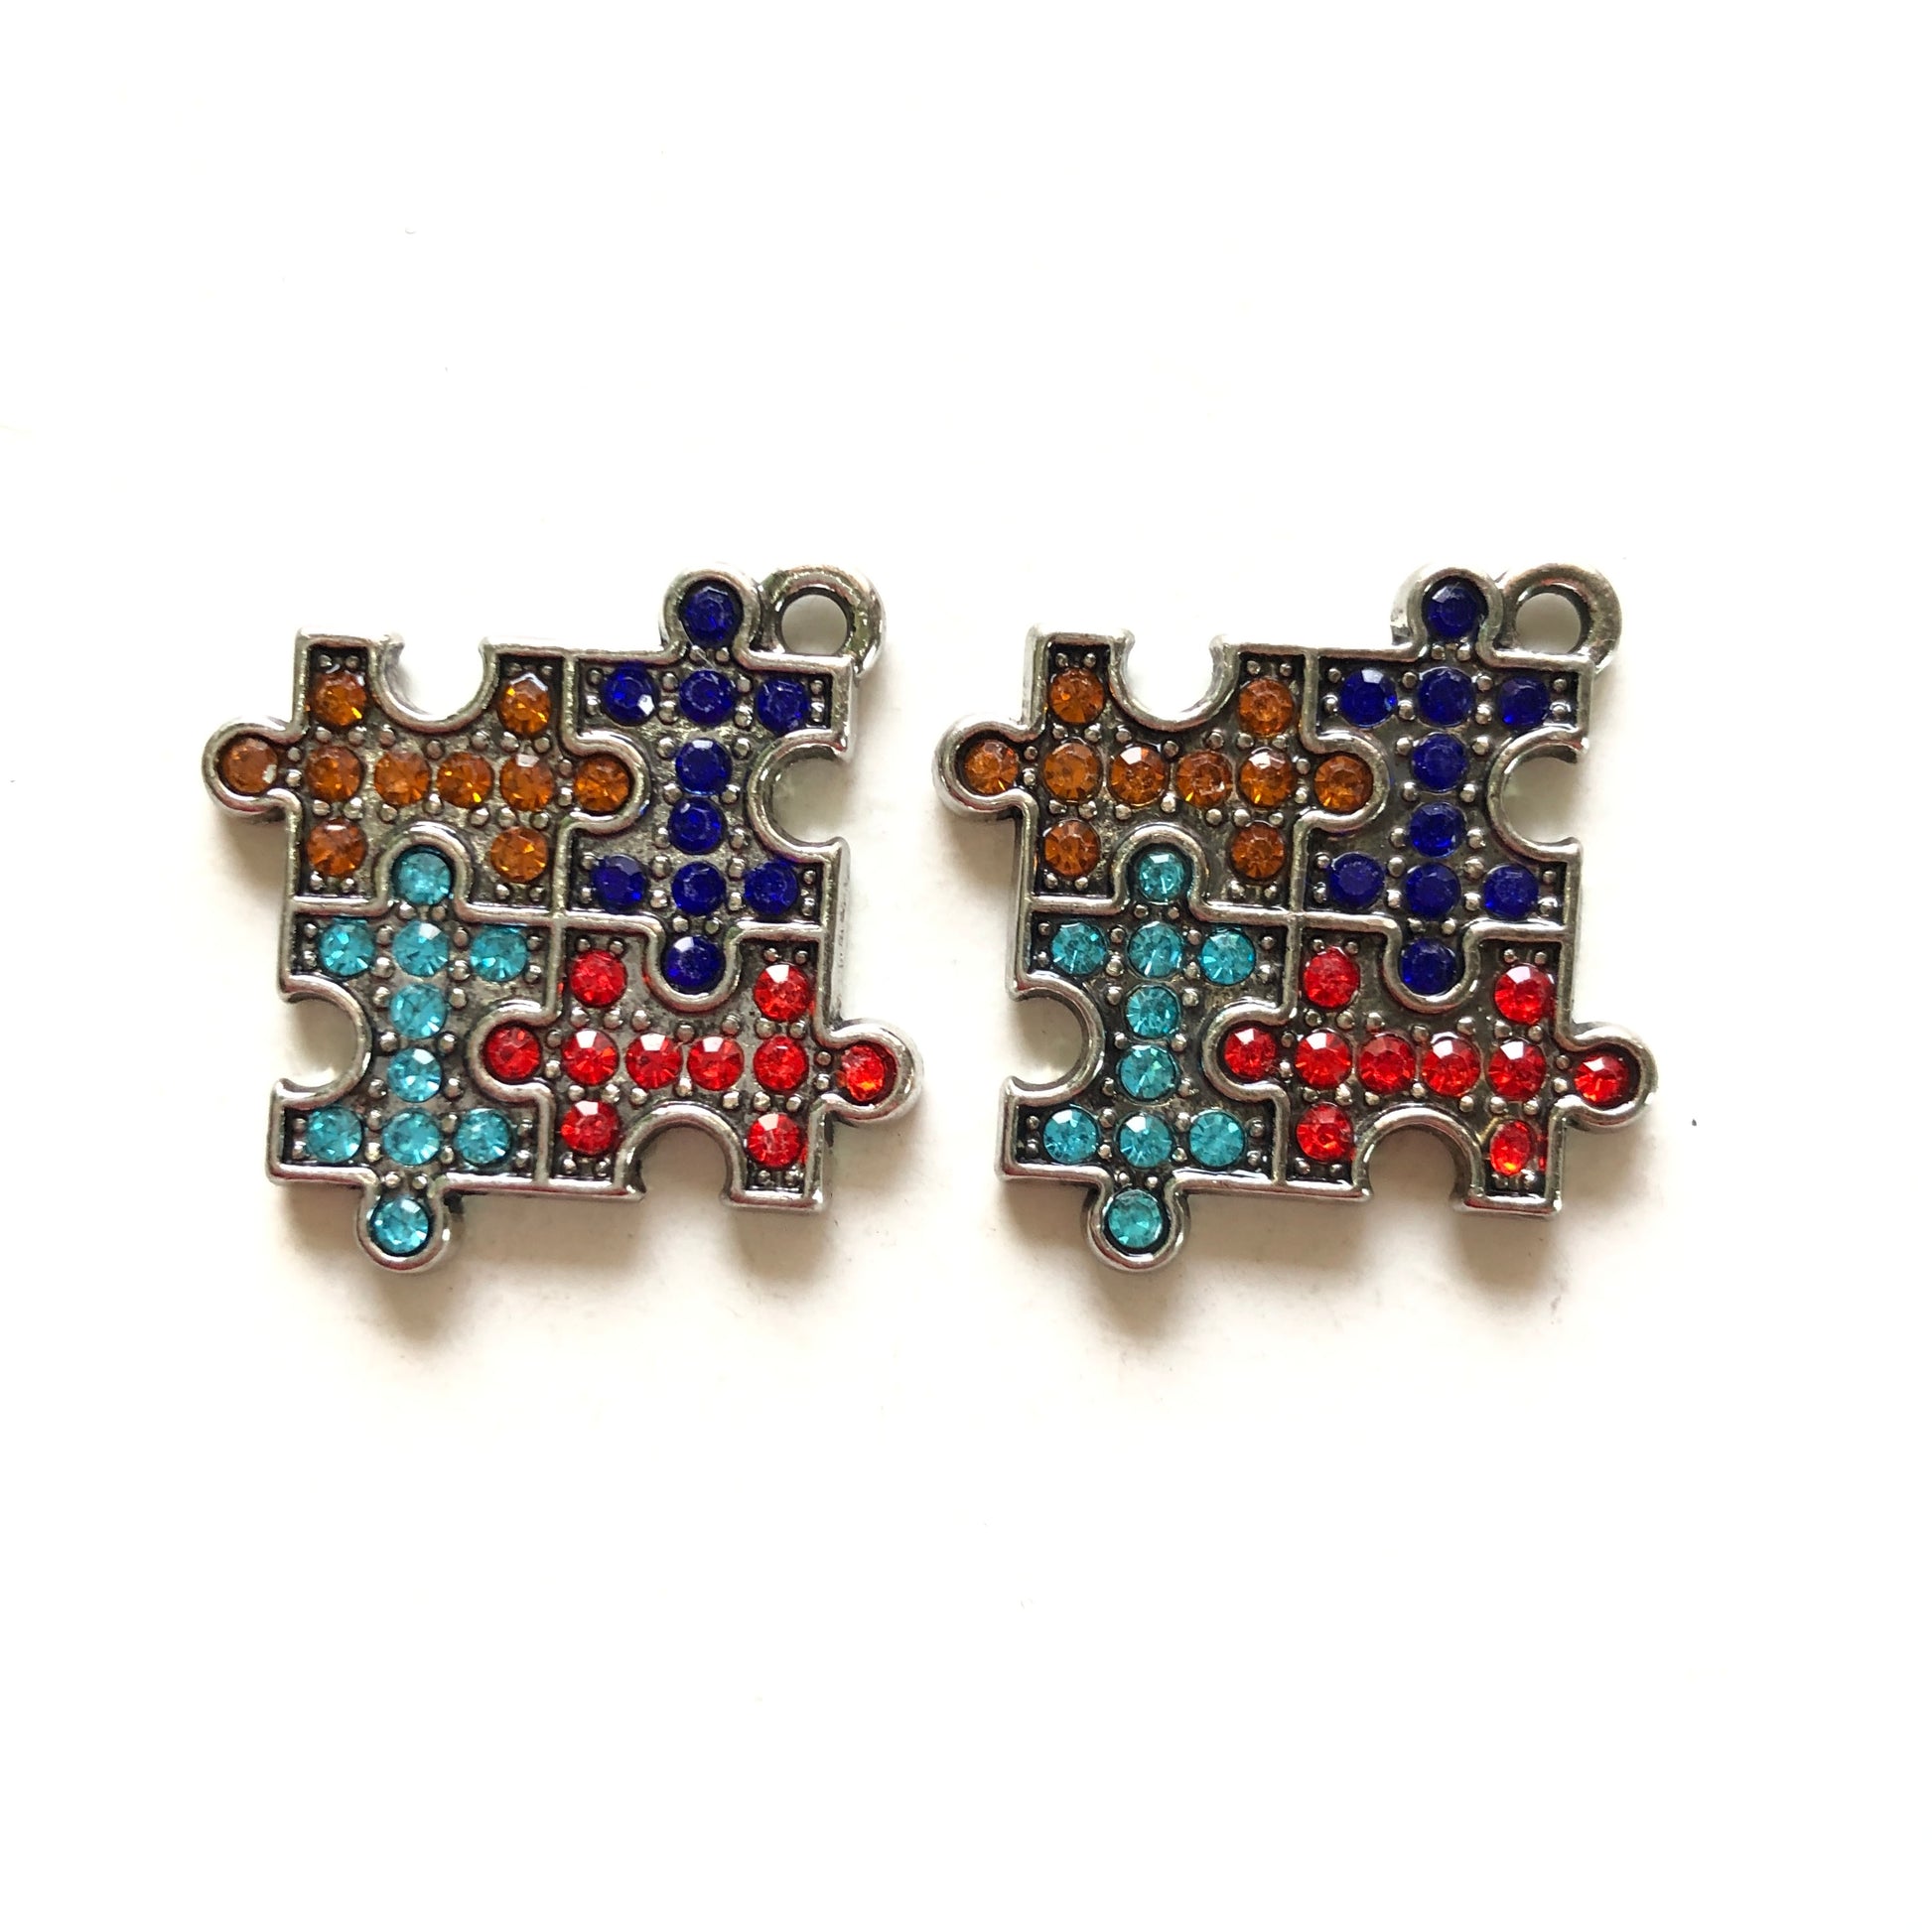 10pcs/lot 24*22mm Puzzle Piece Autism Awareness Charms Alloy Charms Charms Beads Beyond